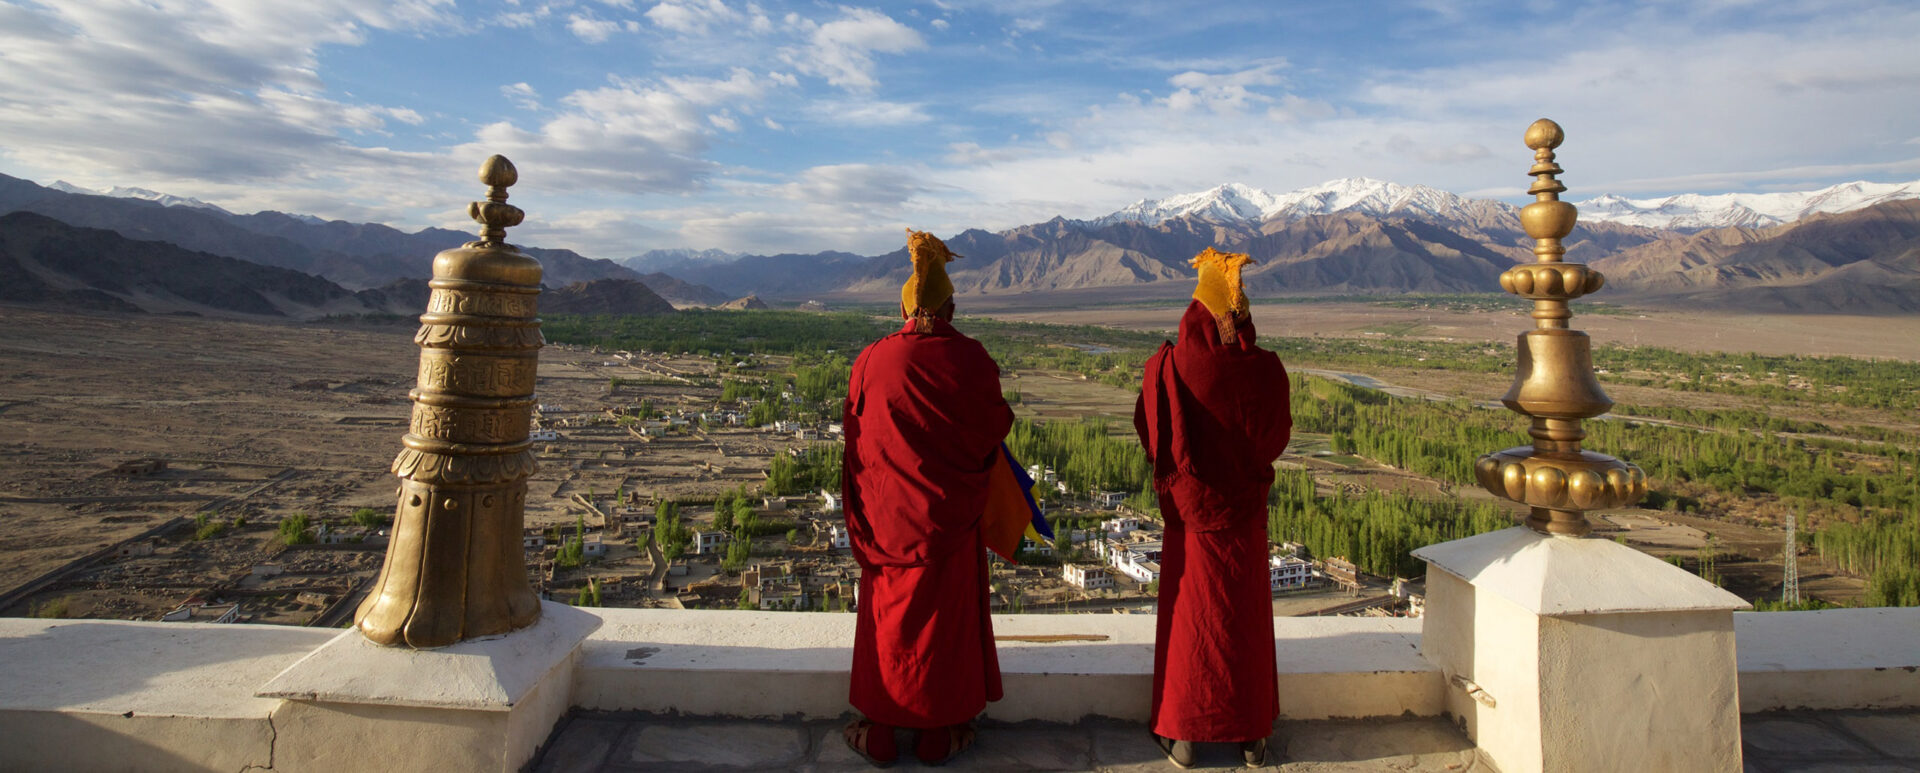 Thiksey Monastery Monks Ladakh is part of India and Maldives twin centre holidays